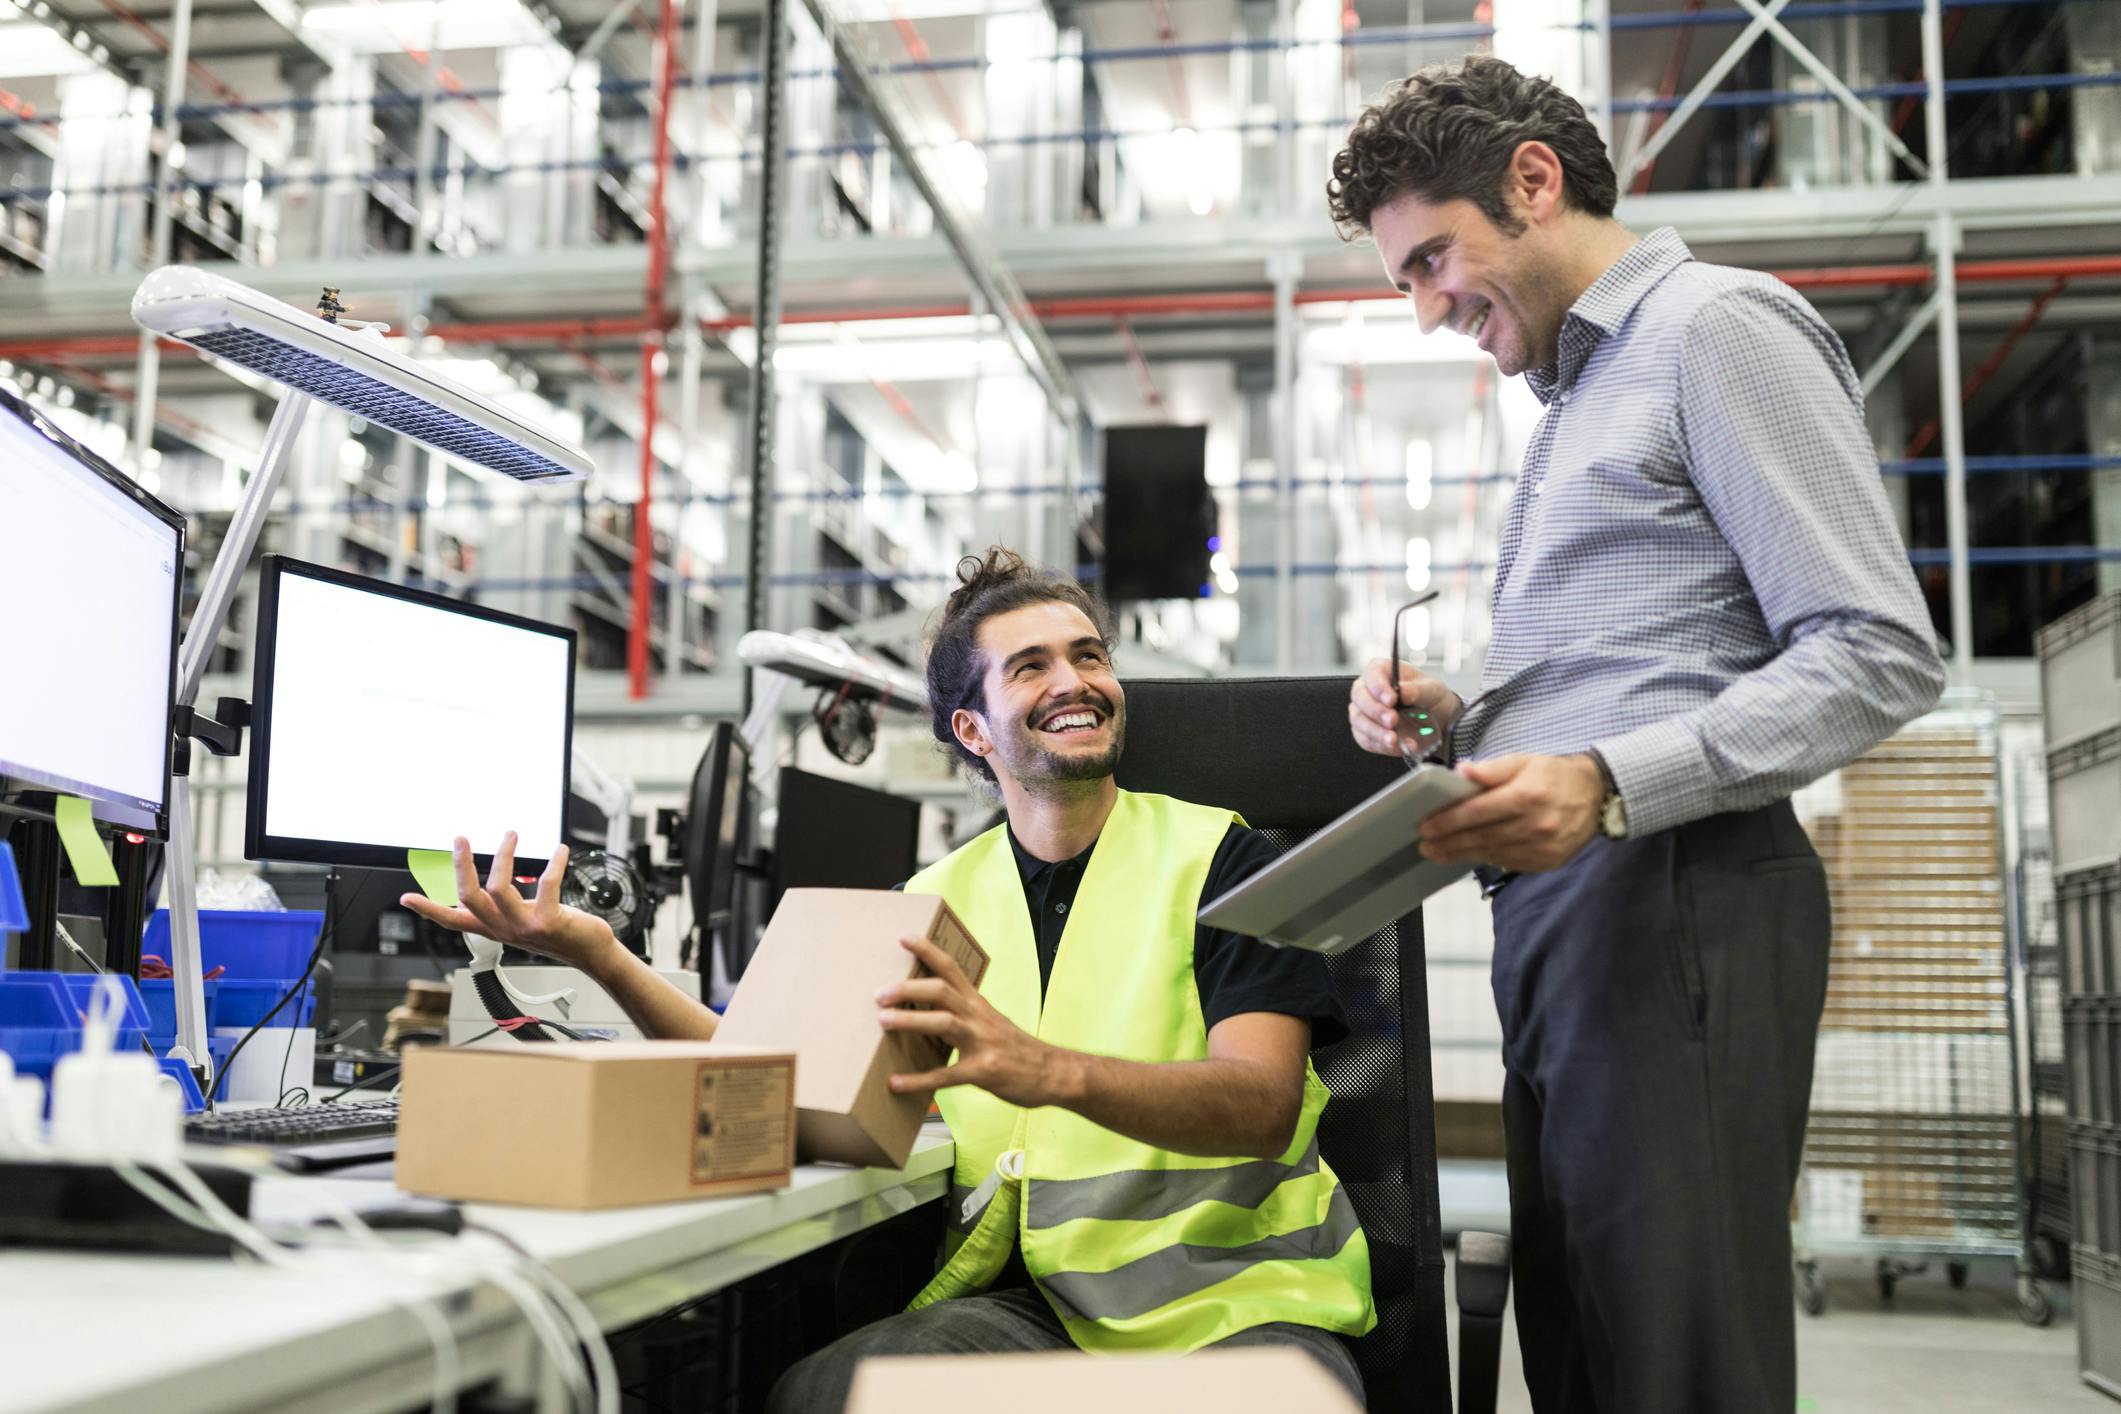 Employees in an automated warehouse: data collection, documentation and fast processes.